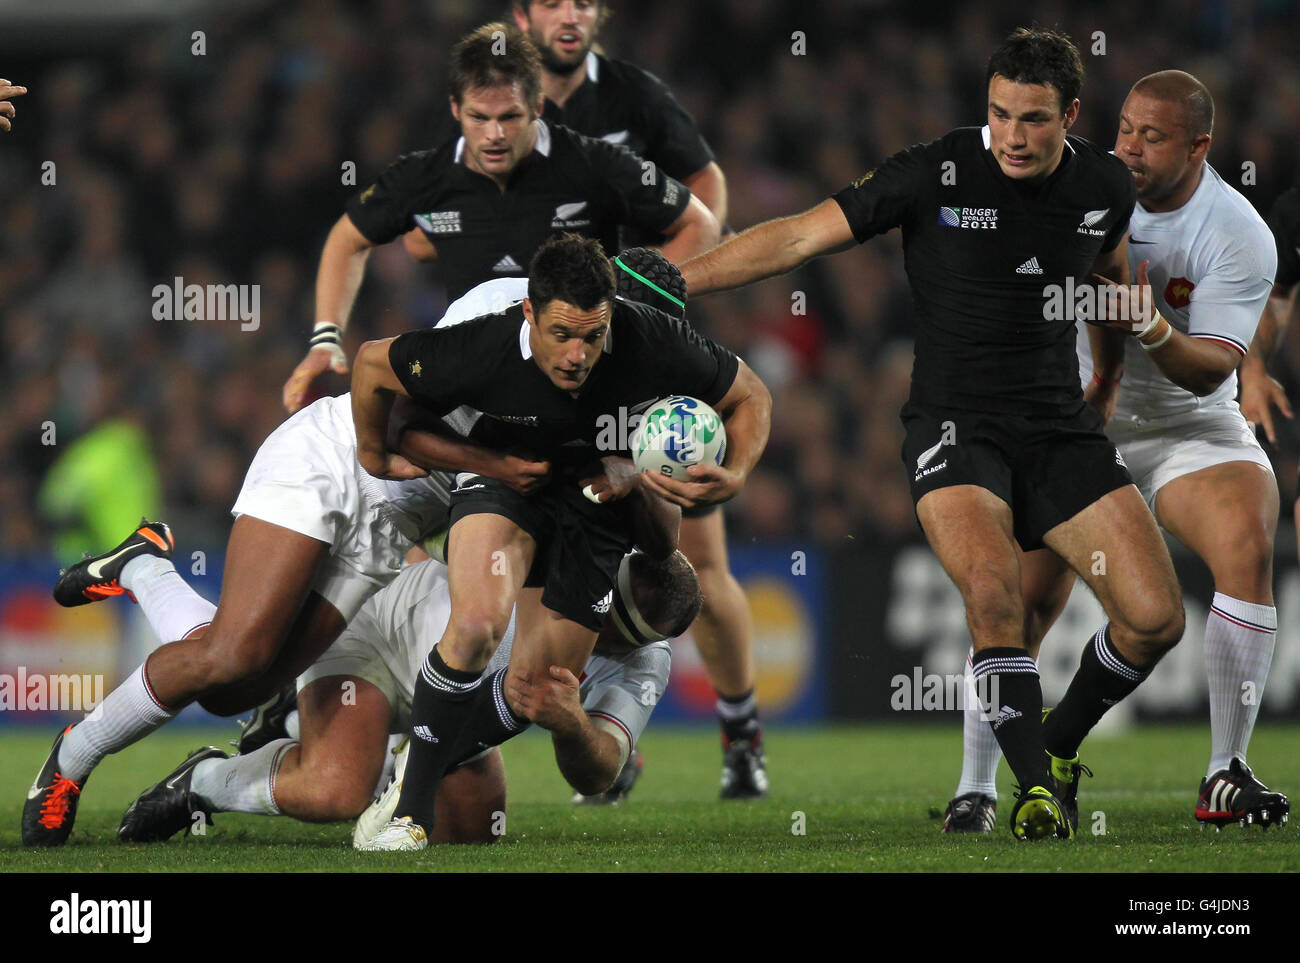 New Zealand's Dan Carter struggles to get through the French defence during the IRB Rugby World Cup match at Eden Park, Auckland, New Zealand. Stock Photo